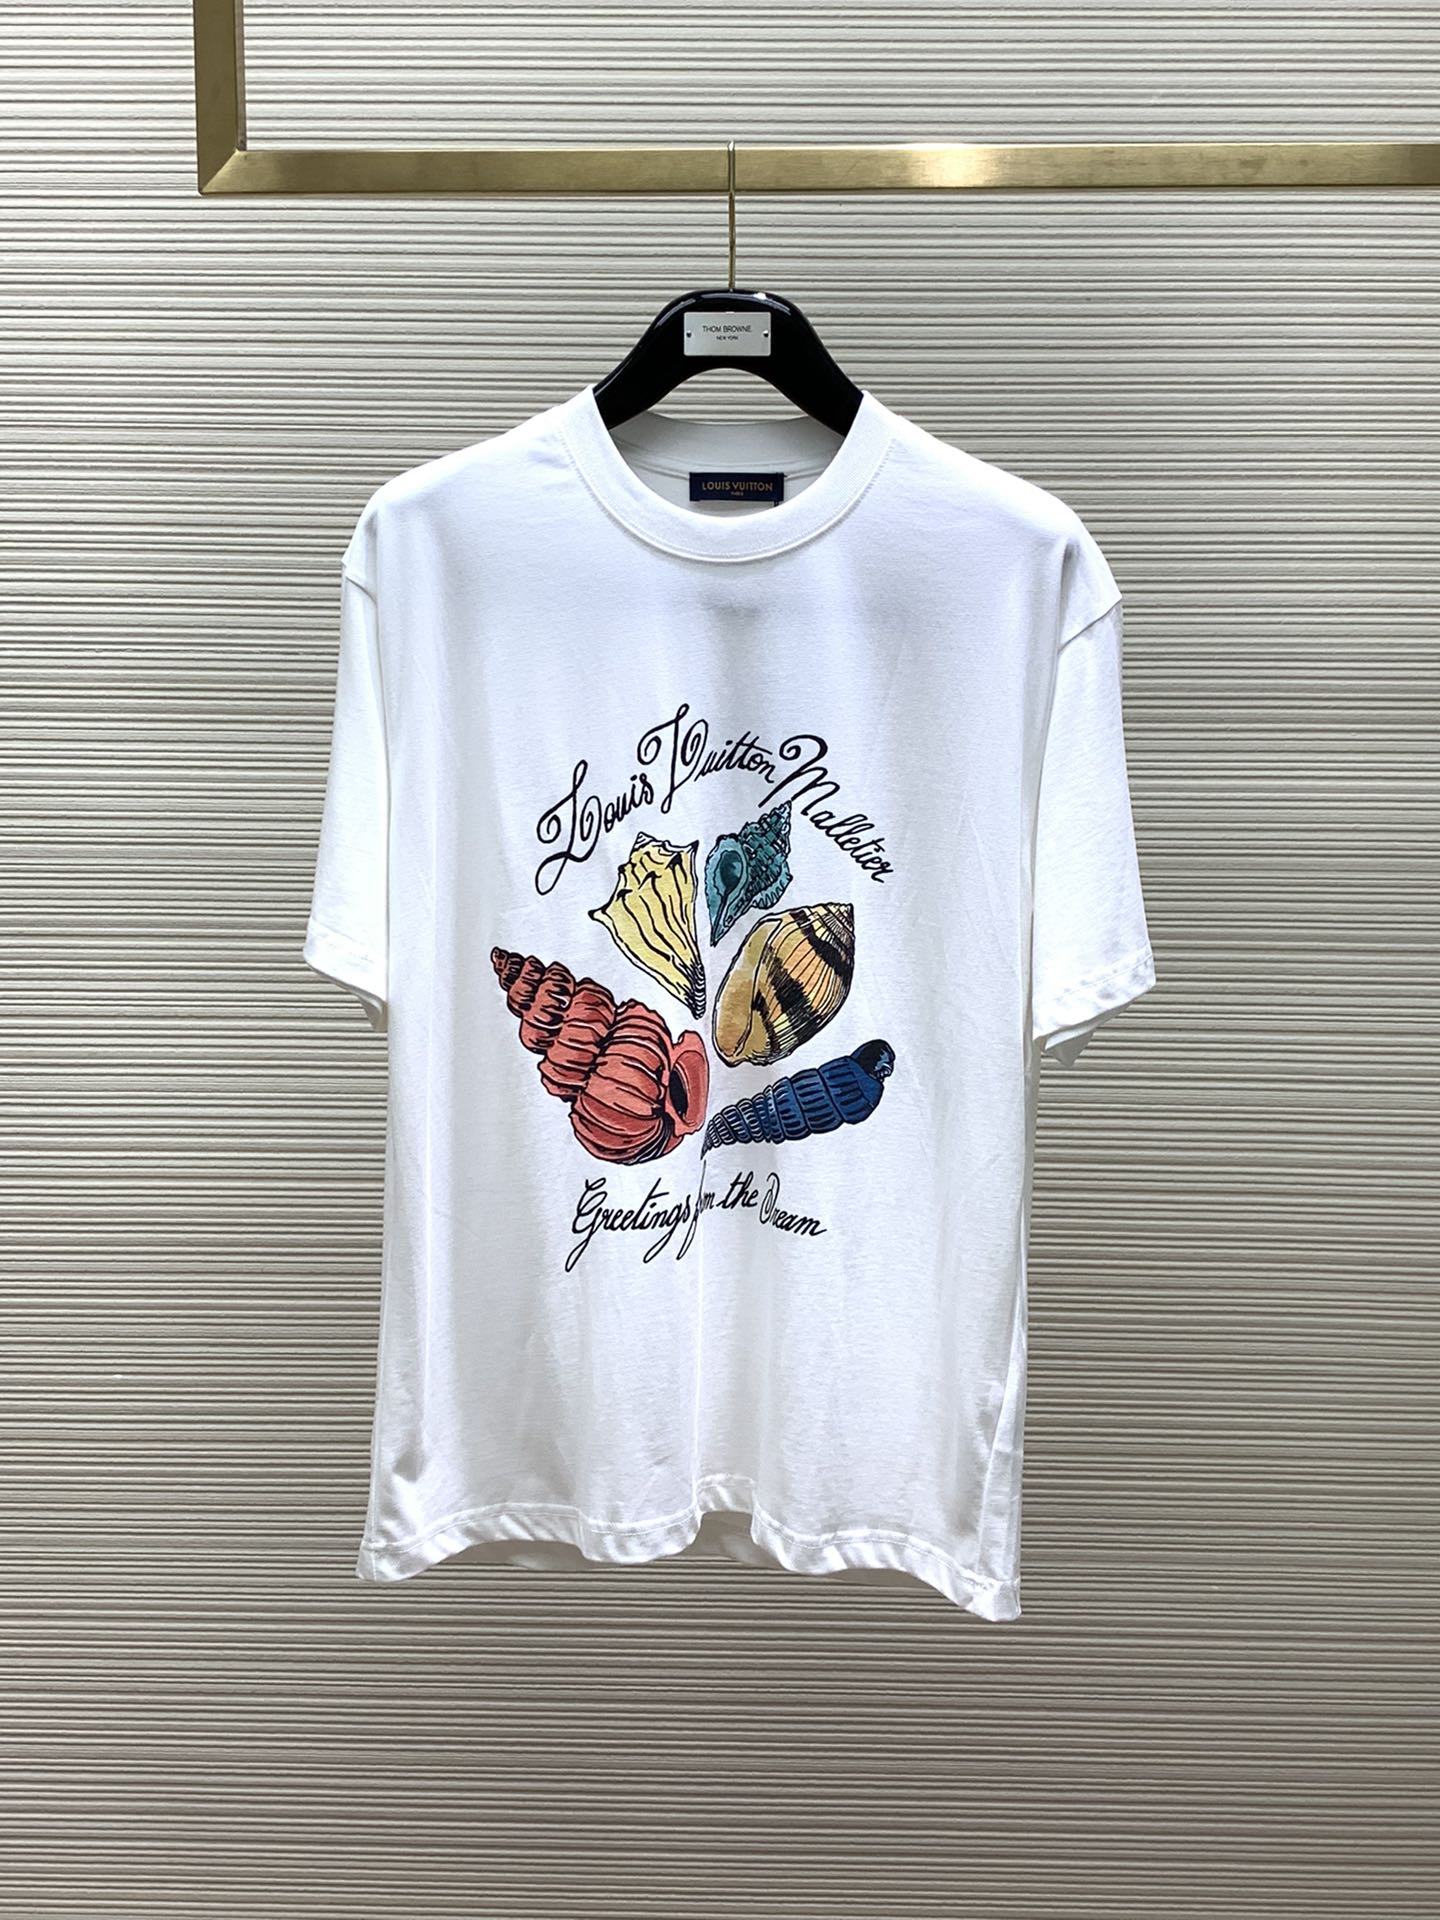 Louis Vuitton Clothing T-Shirt Printing Summer Collection Fashion Short Sleeve